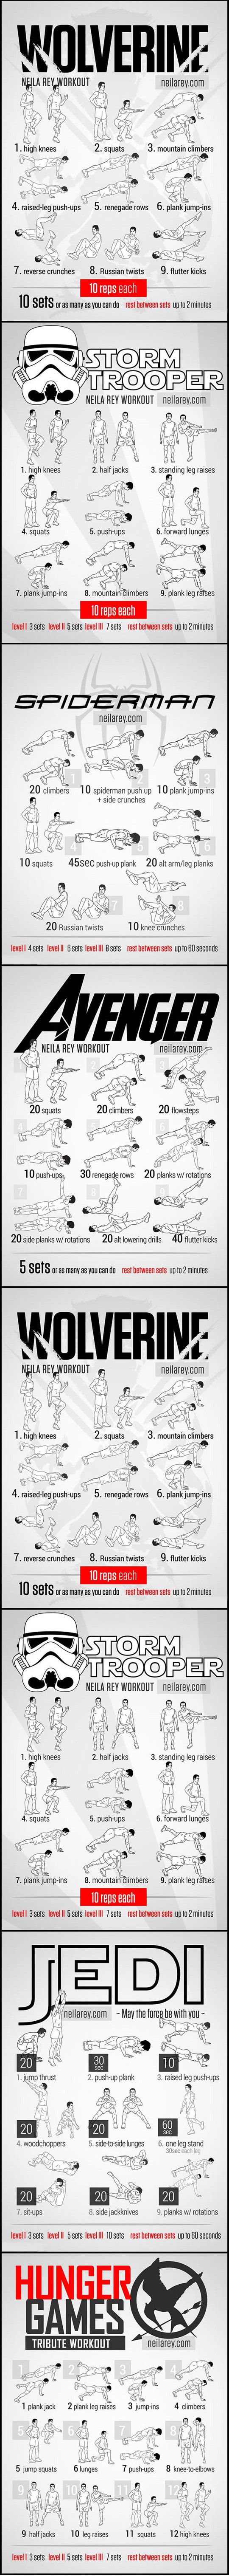 Movie workout routines.